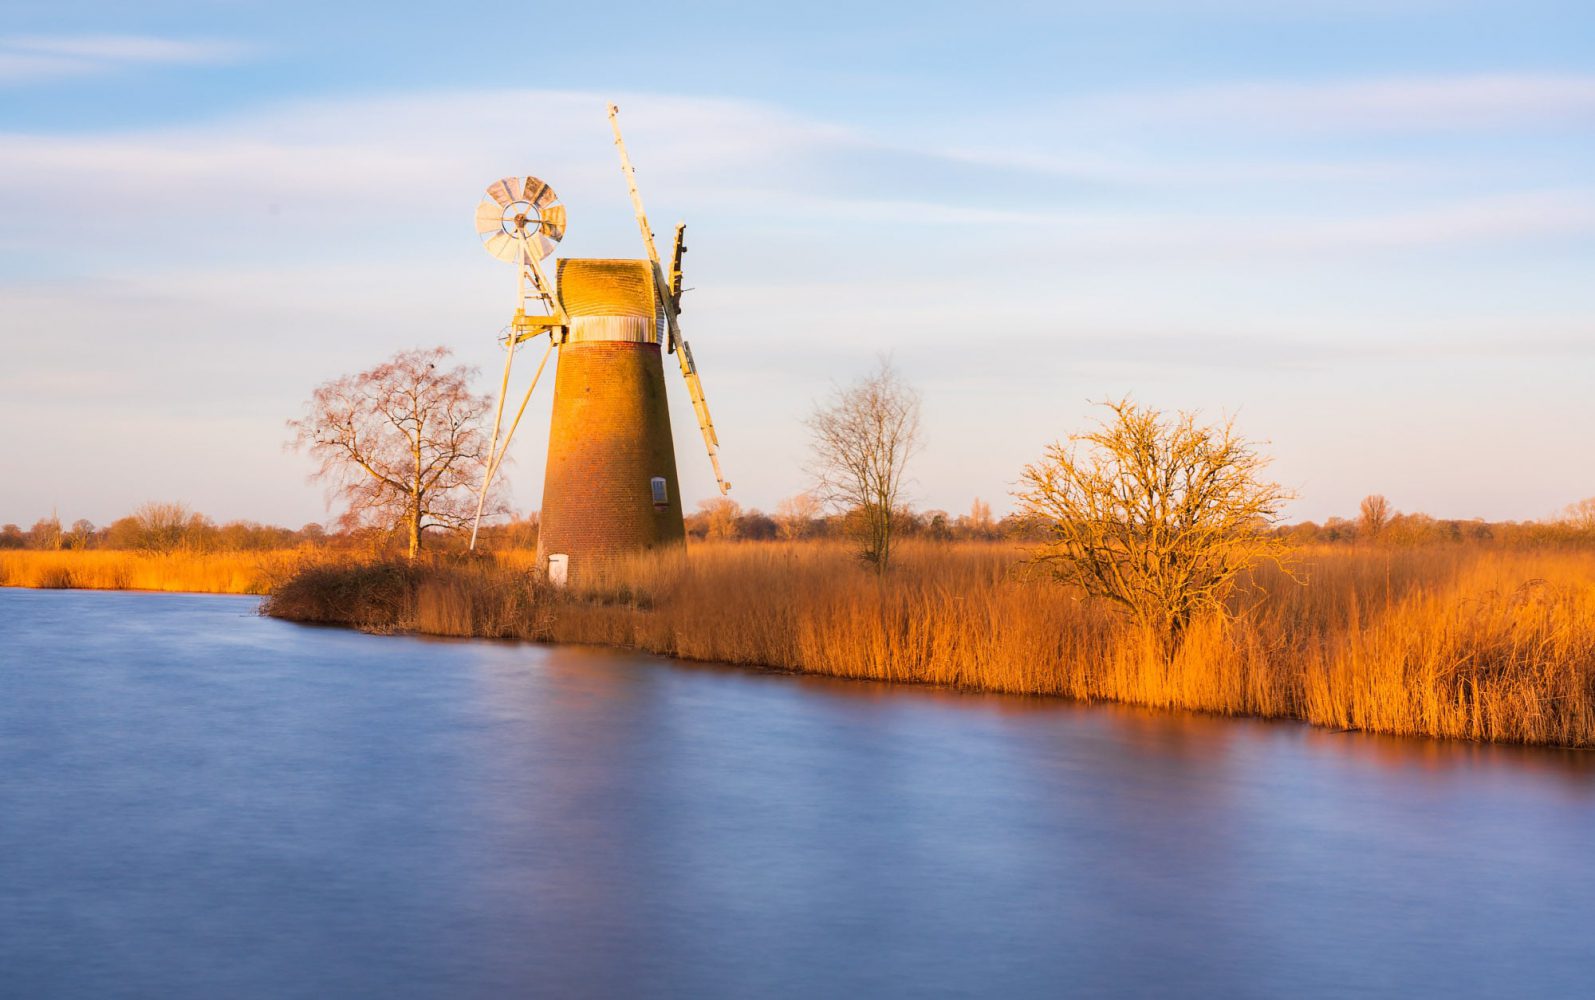 Turf Fen Mill on the River Ant in Norfolk